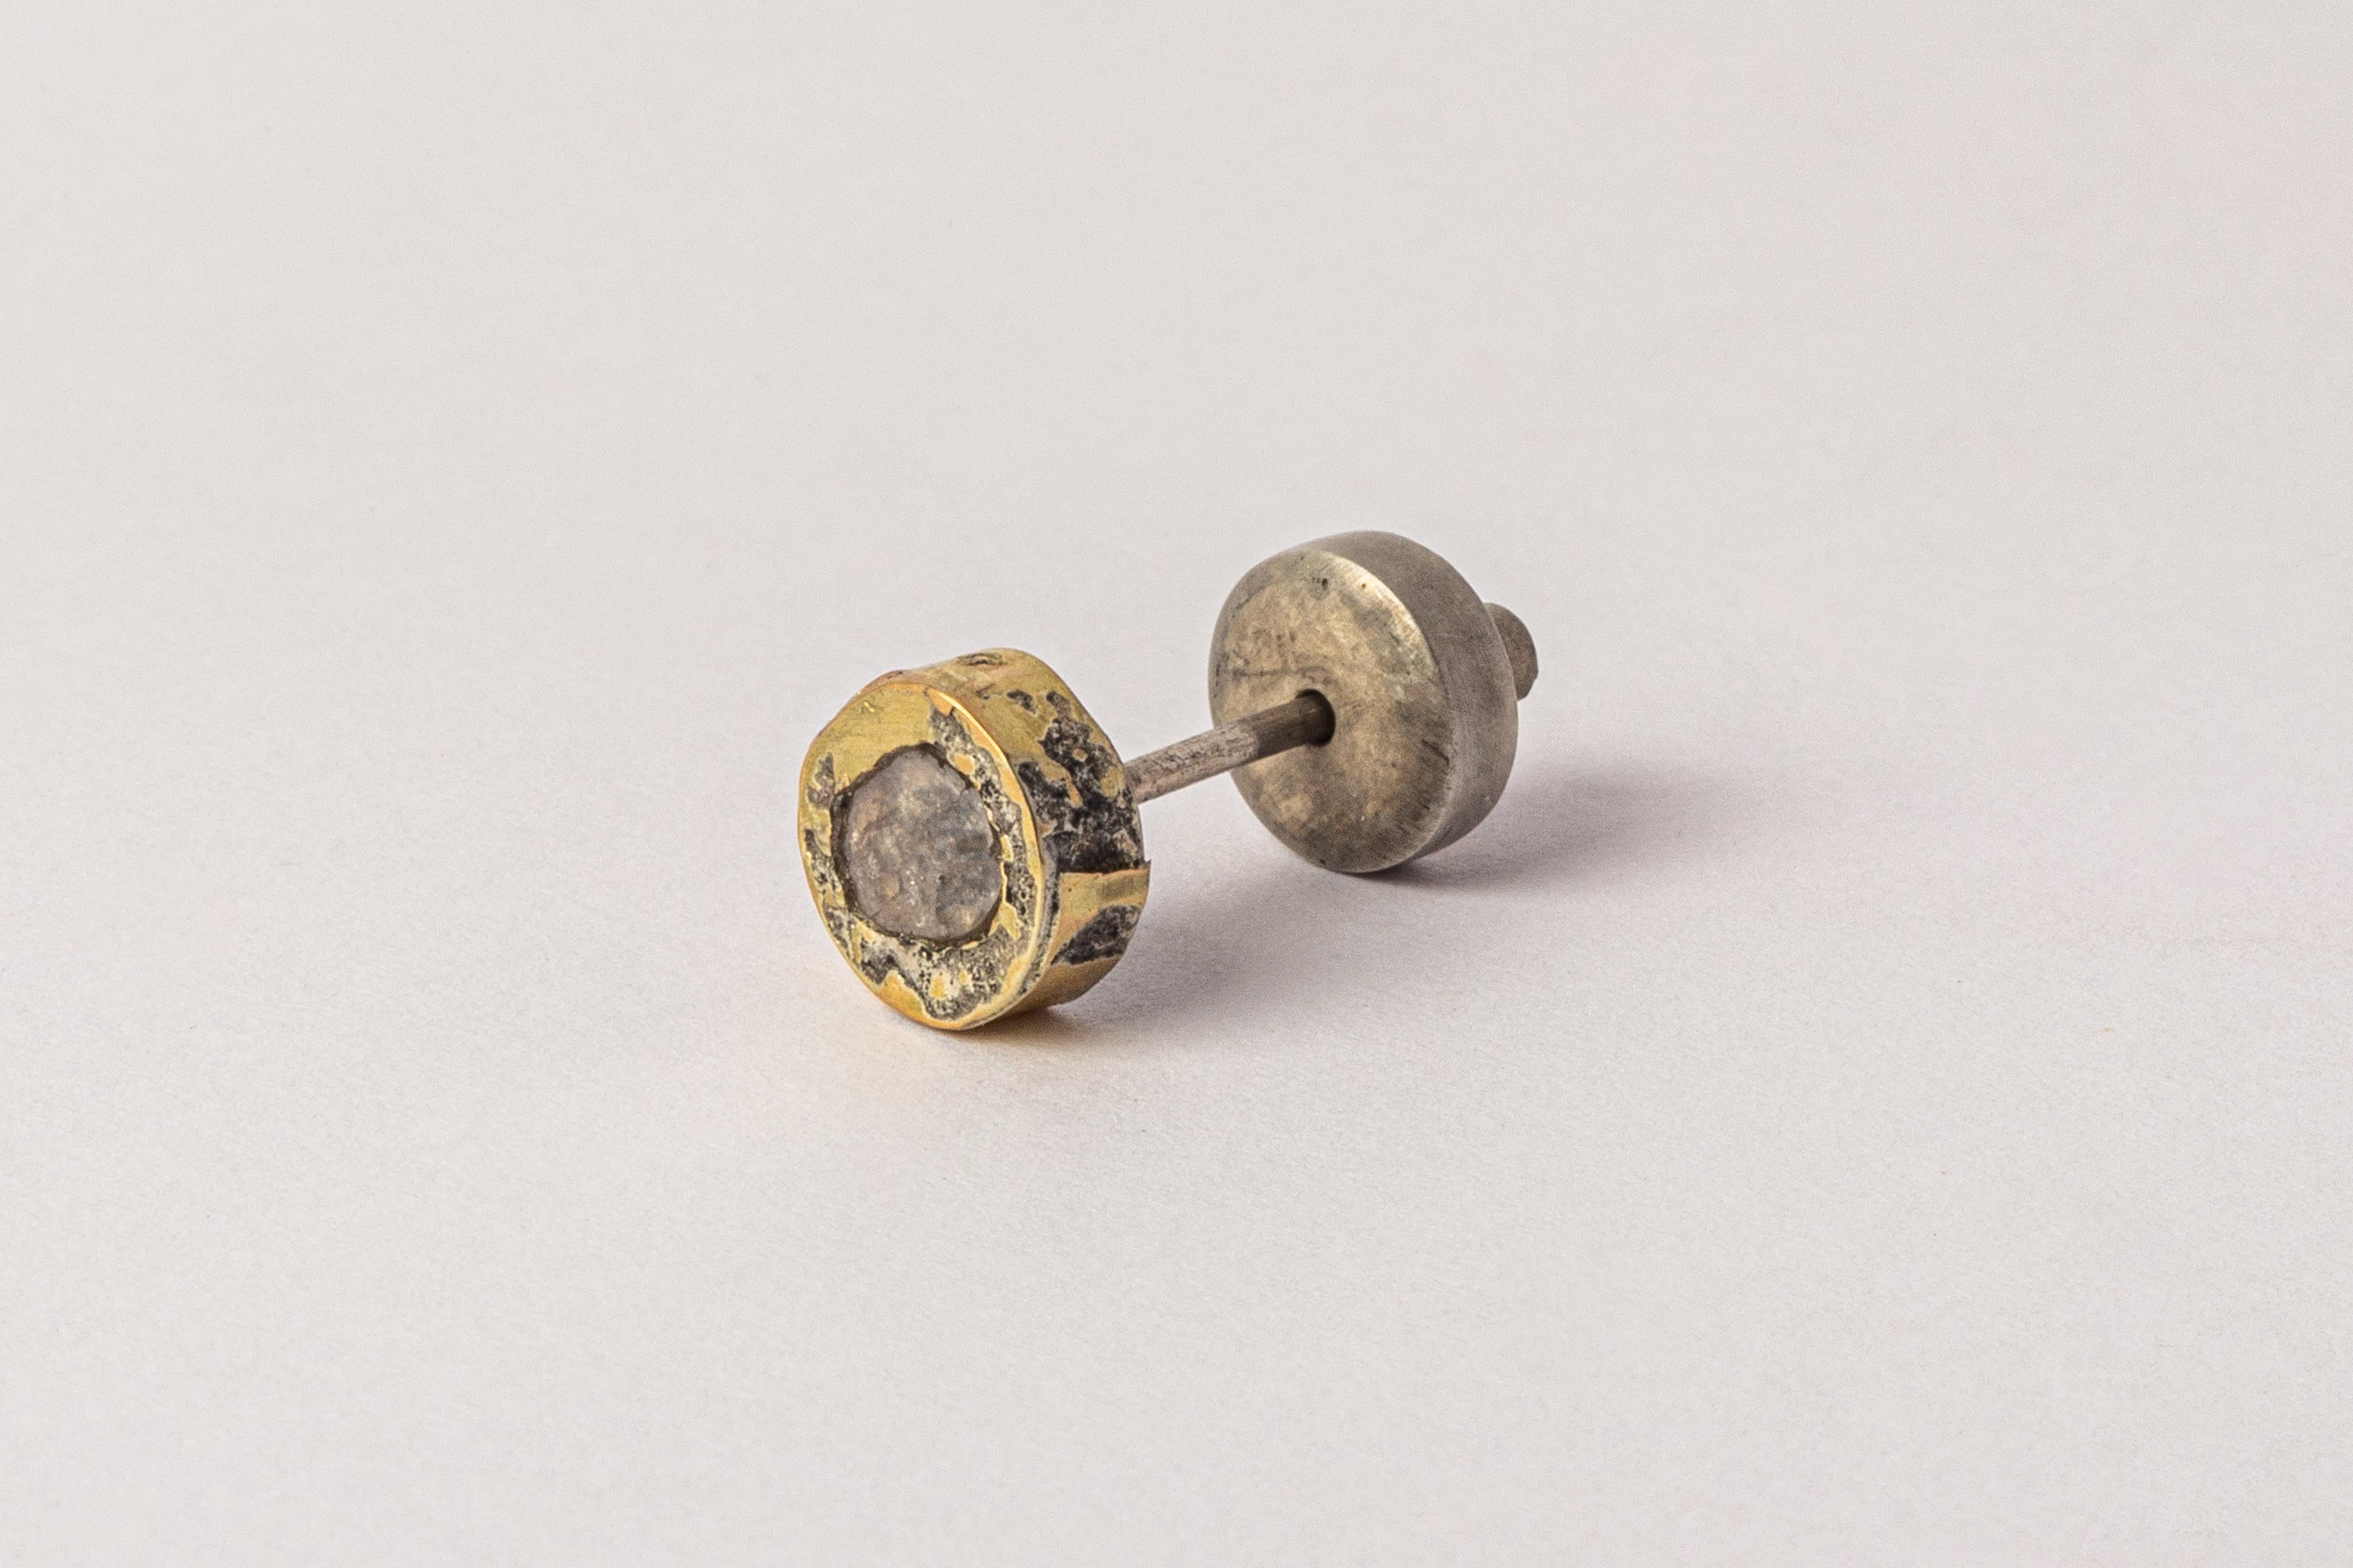 Tiny stud earring in sterling silver, fused layer of 18k yellow gold, and slab of rough diamond. This slab is removed from a larger chunk of diamond. This item is made with a naturally occurring element and will vary from the photograph you see.